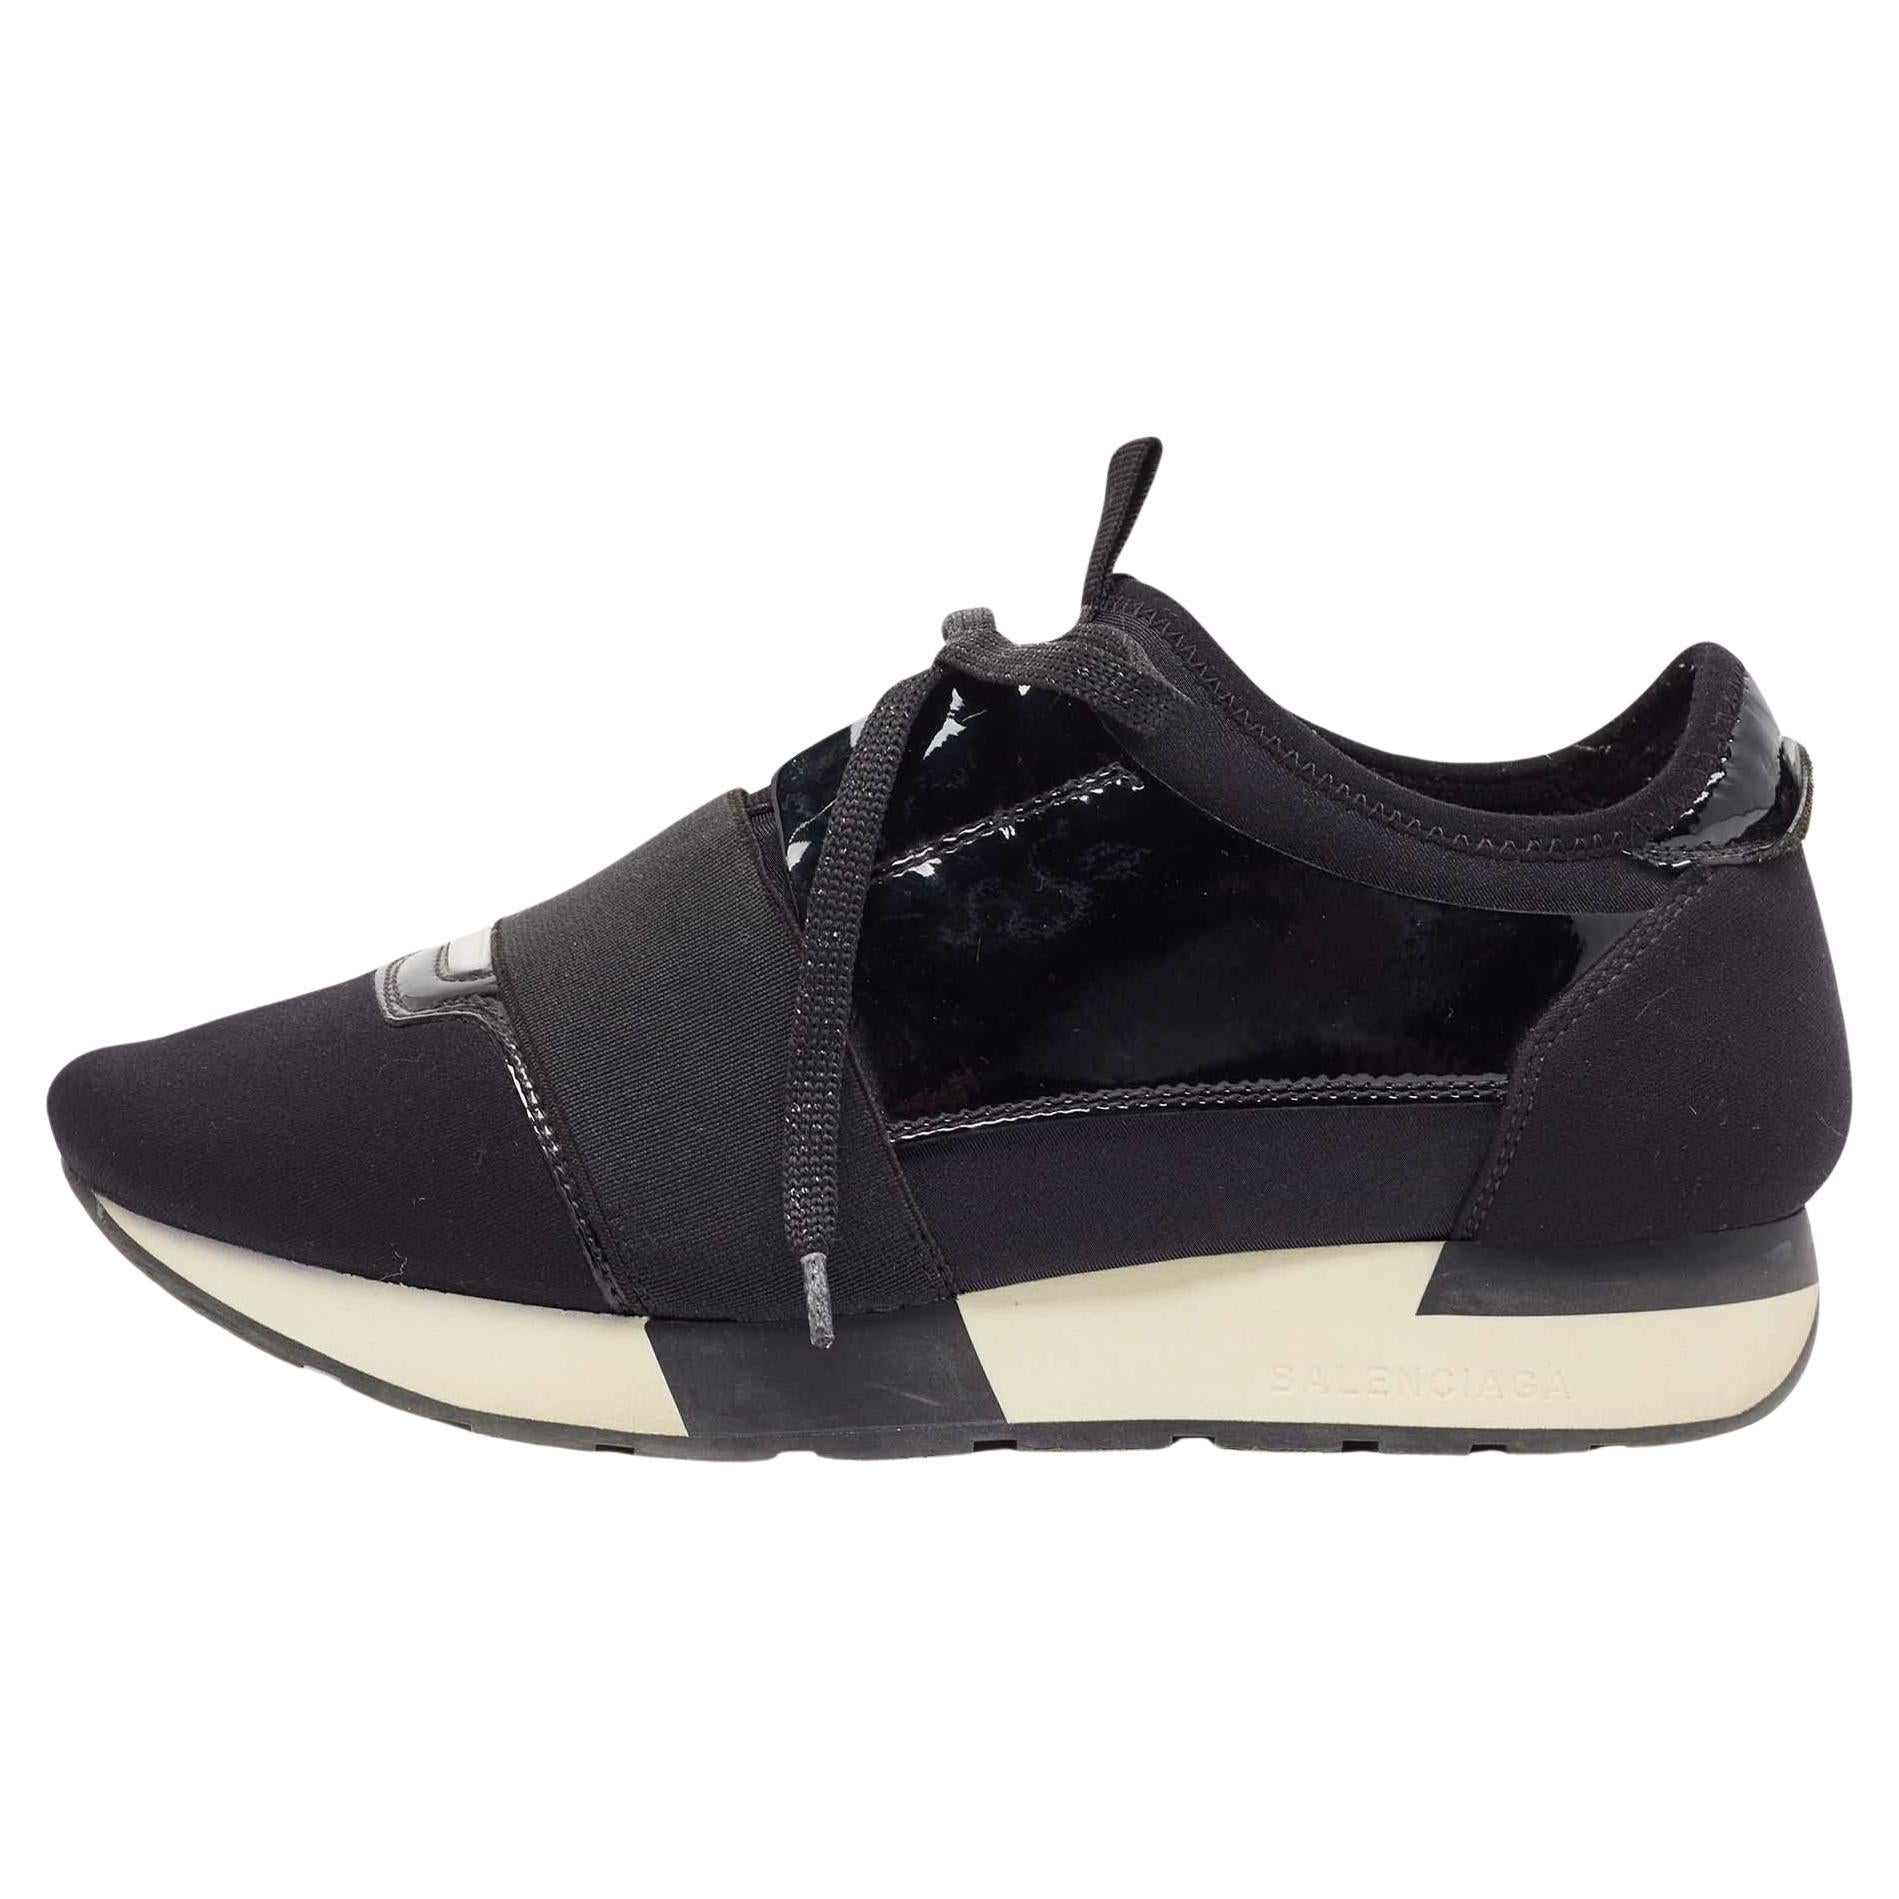 Balenciaga Black Neoprene and Patent Race Runner Sneakers Size 37 For Sale